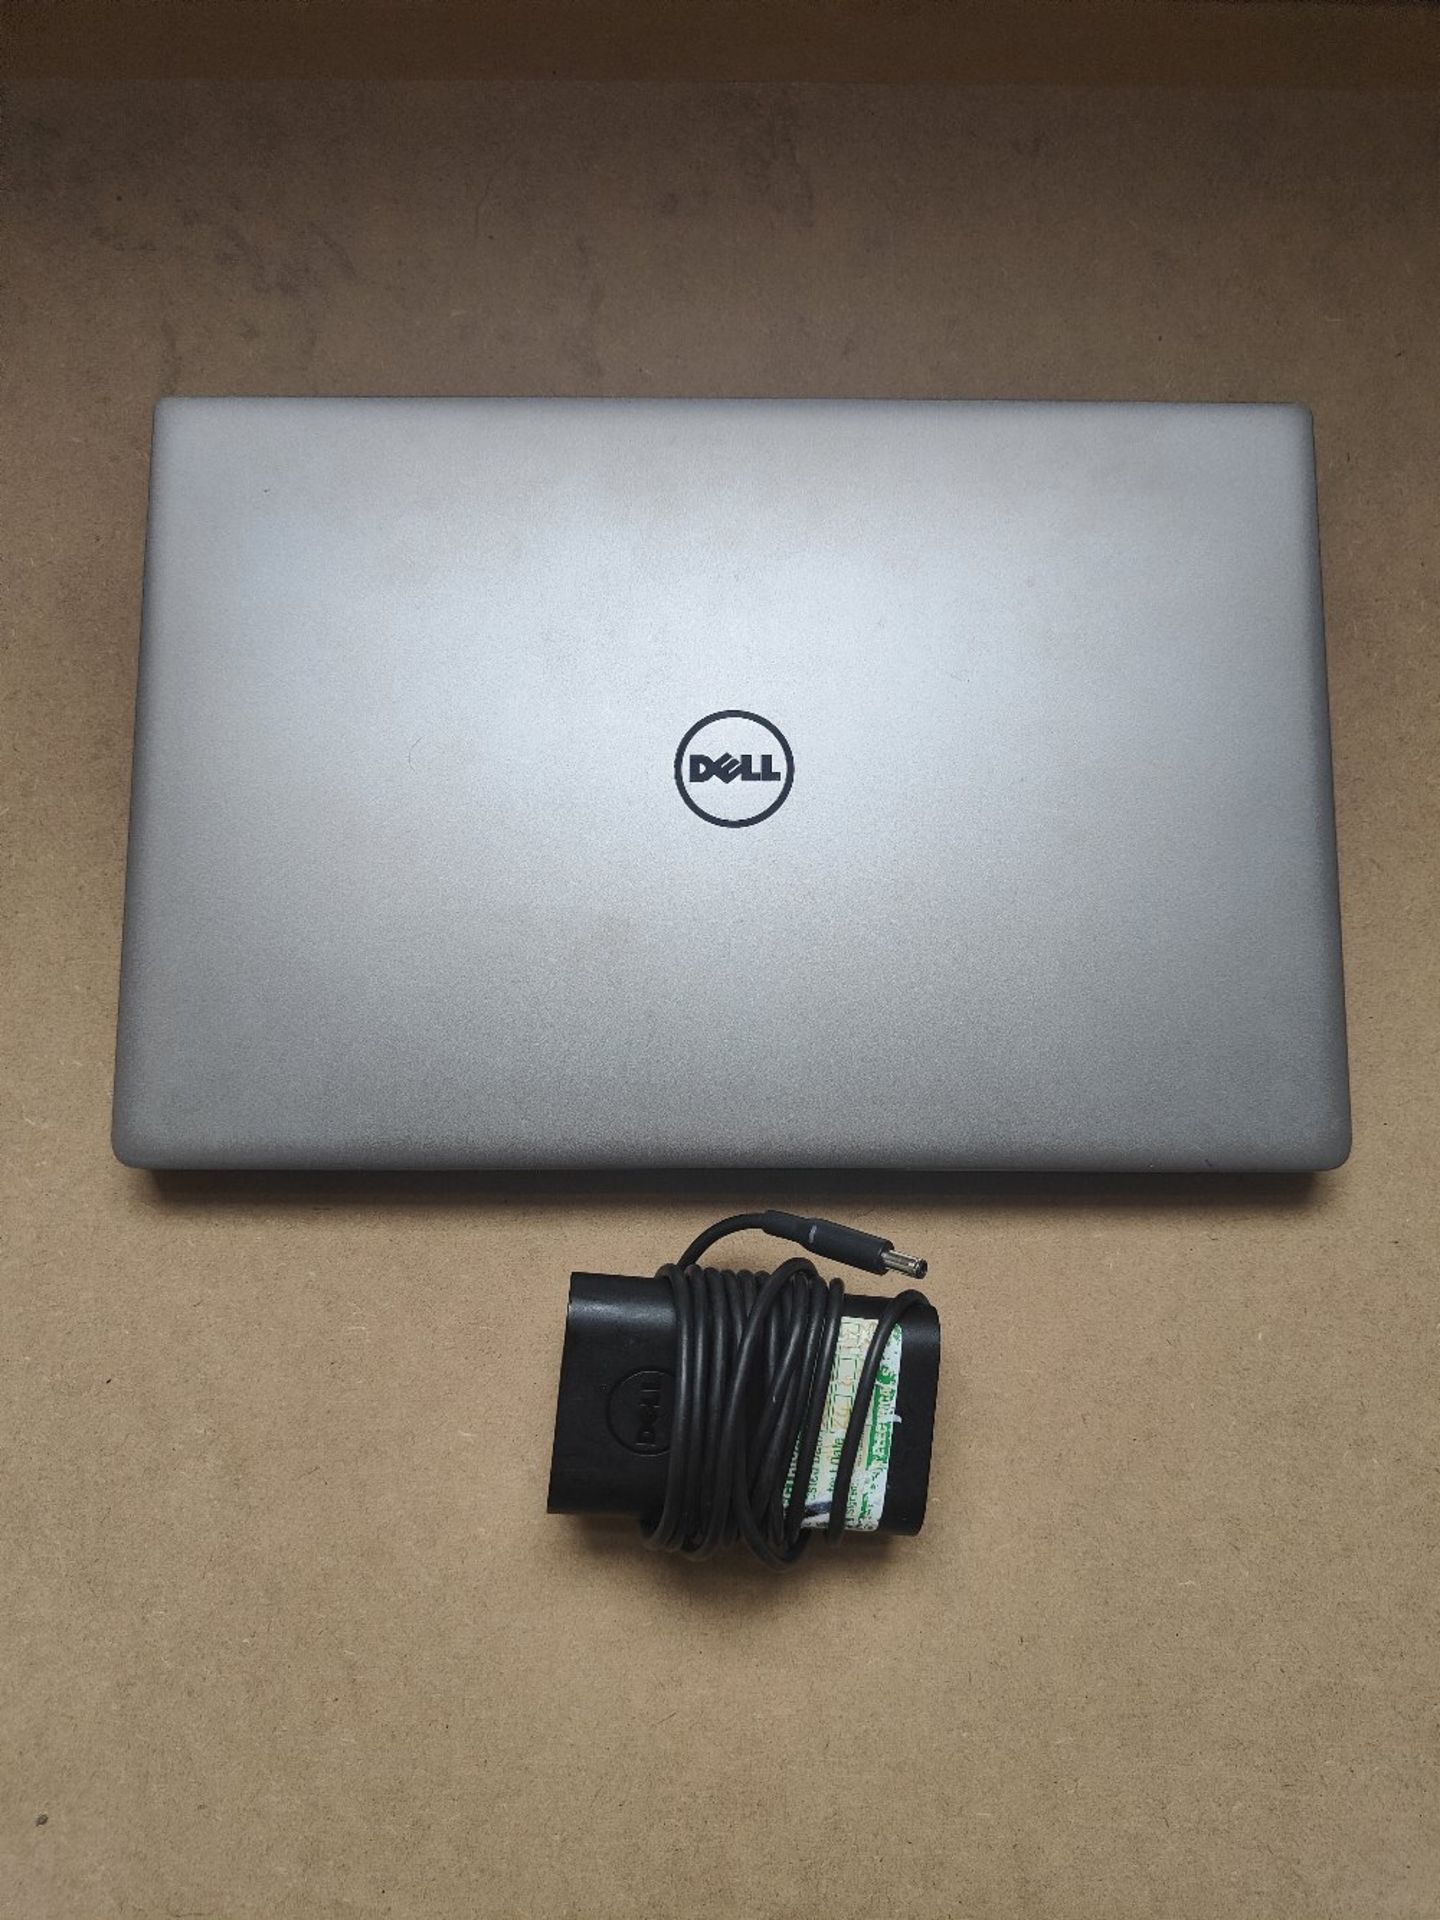 Dell XPS 13 9360 Laptop (2017) - Intel i5 8th Gen - Image 3 of 4